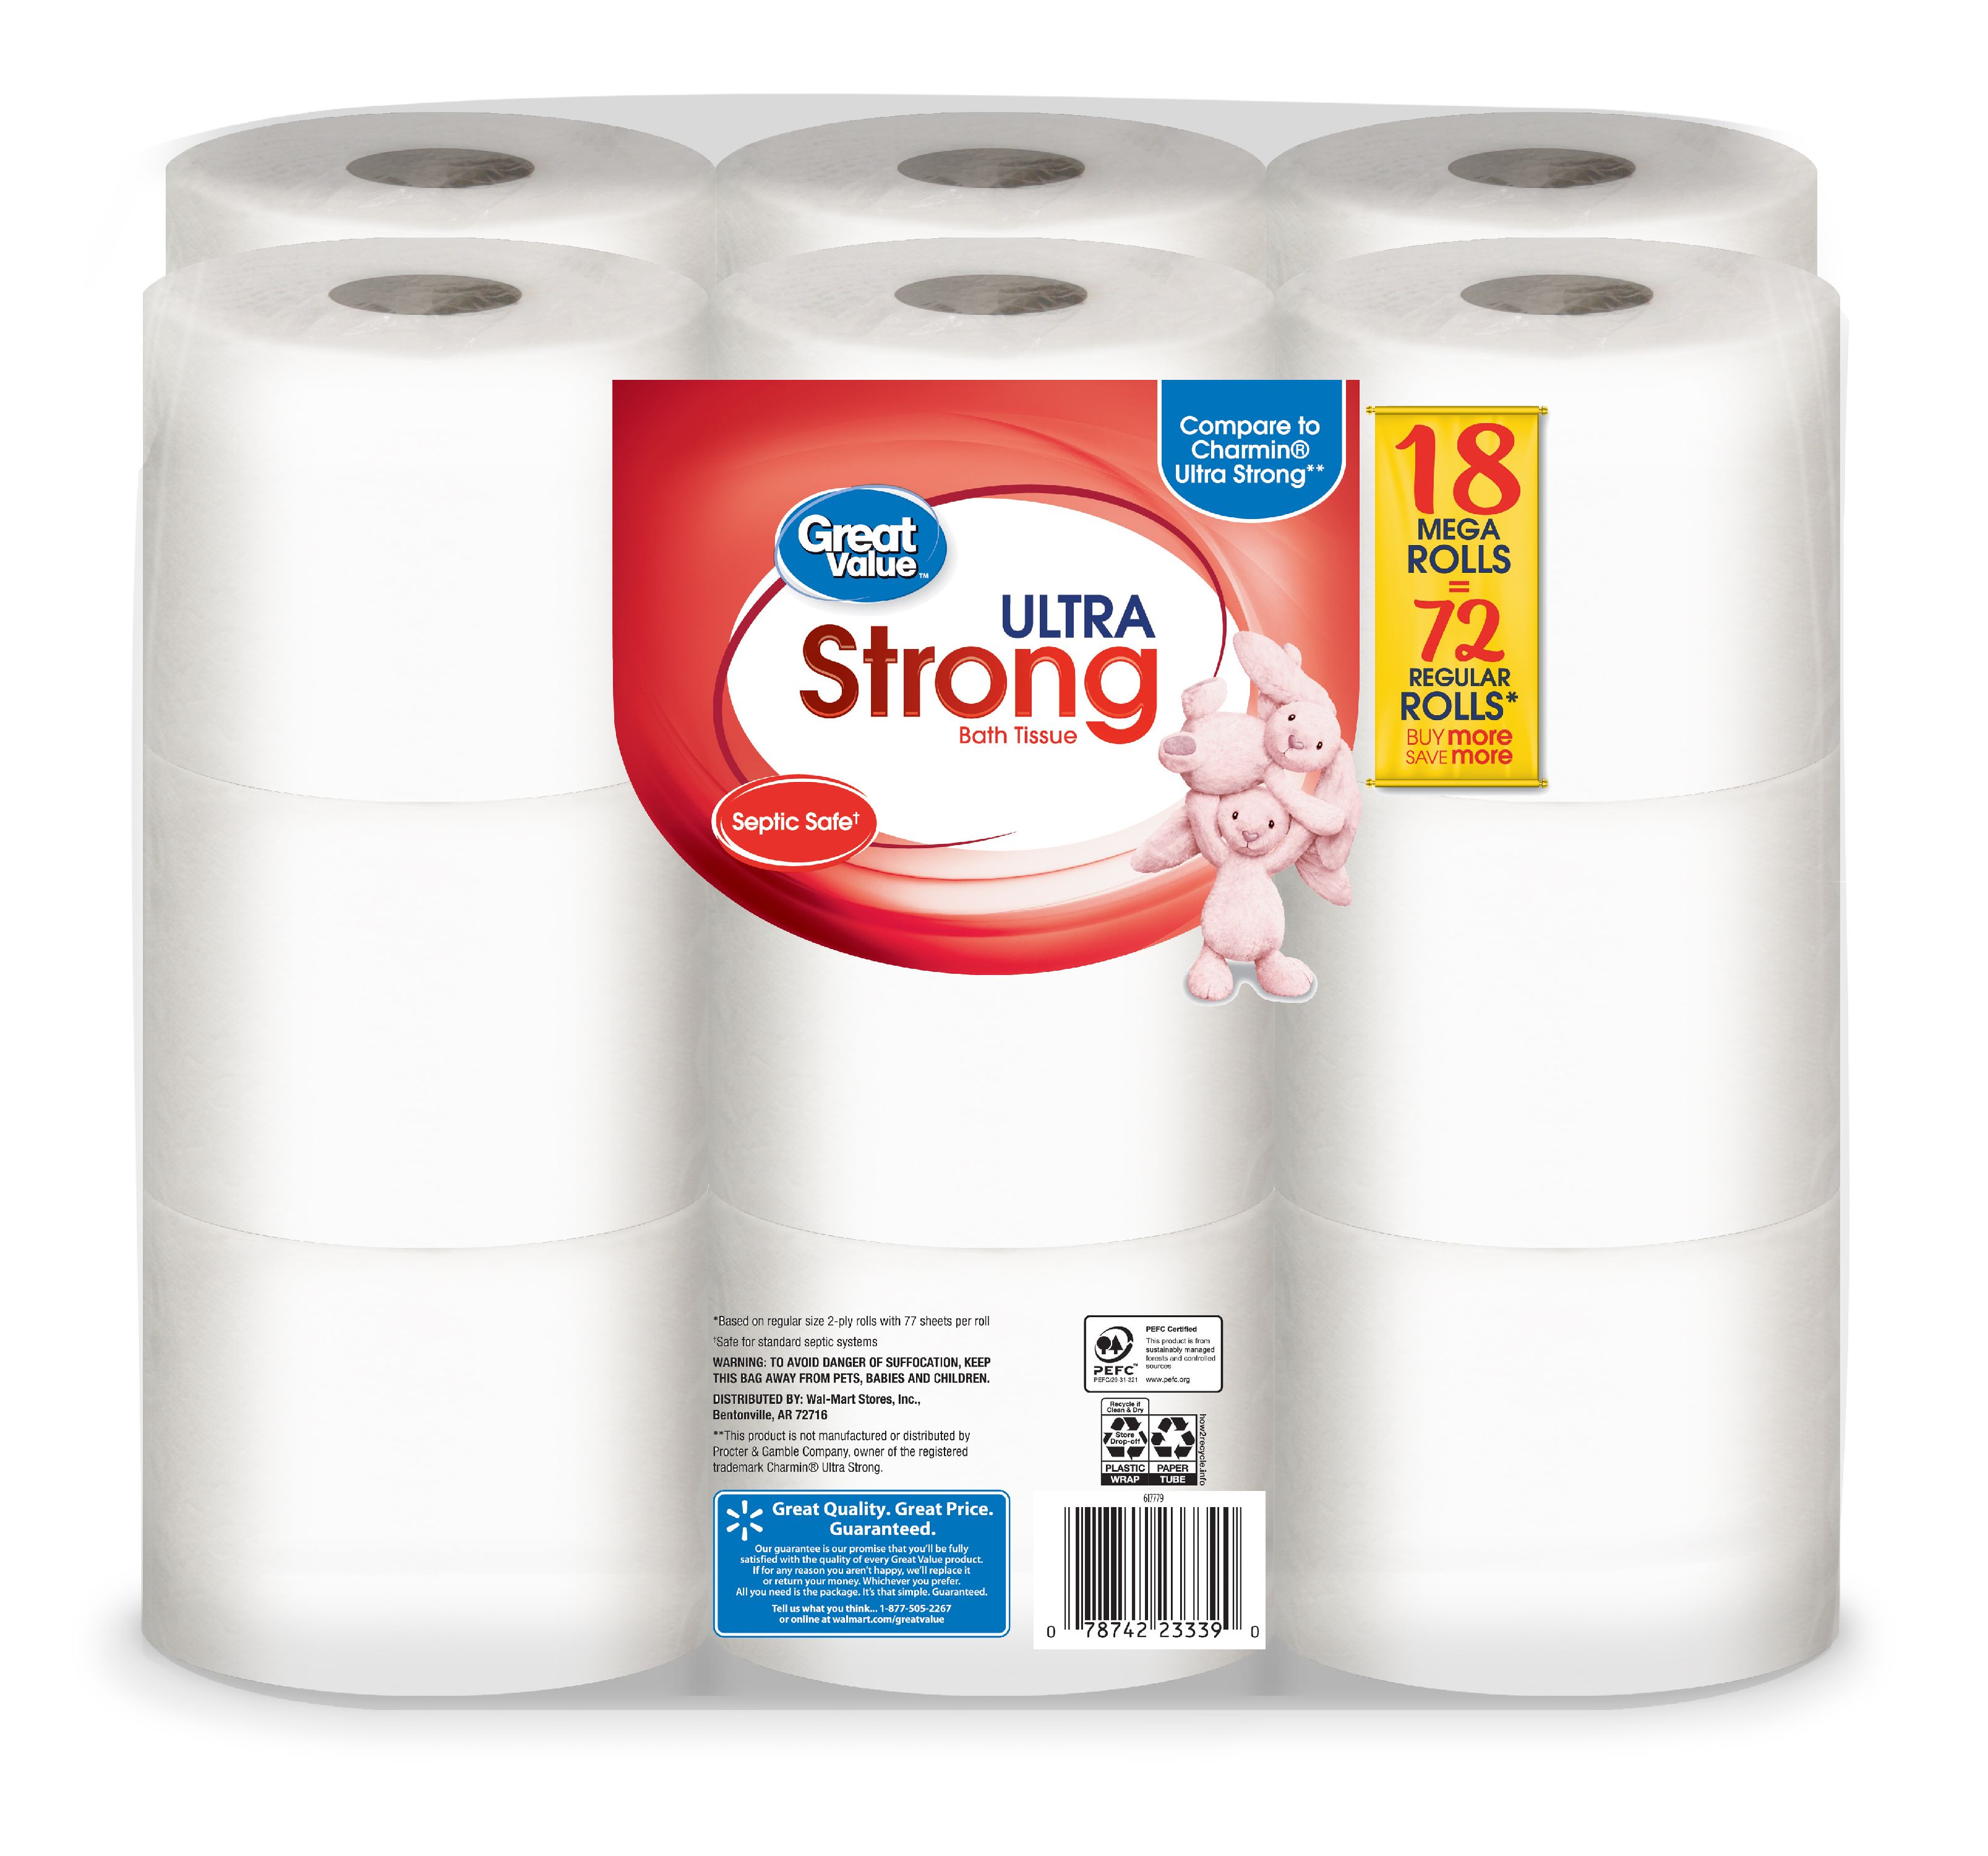 Great Value Ultra Strong Toilet Paper, 18 Mega Rolls - image 3 of 7